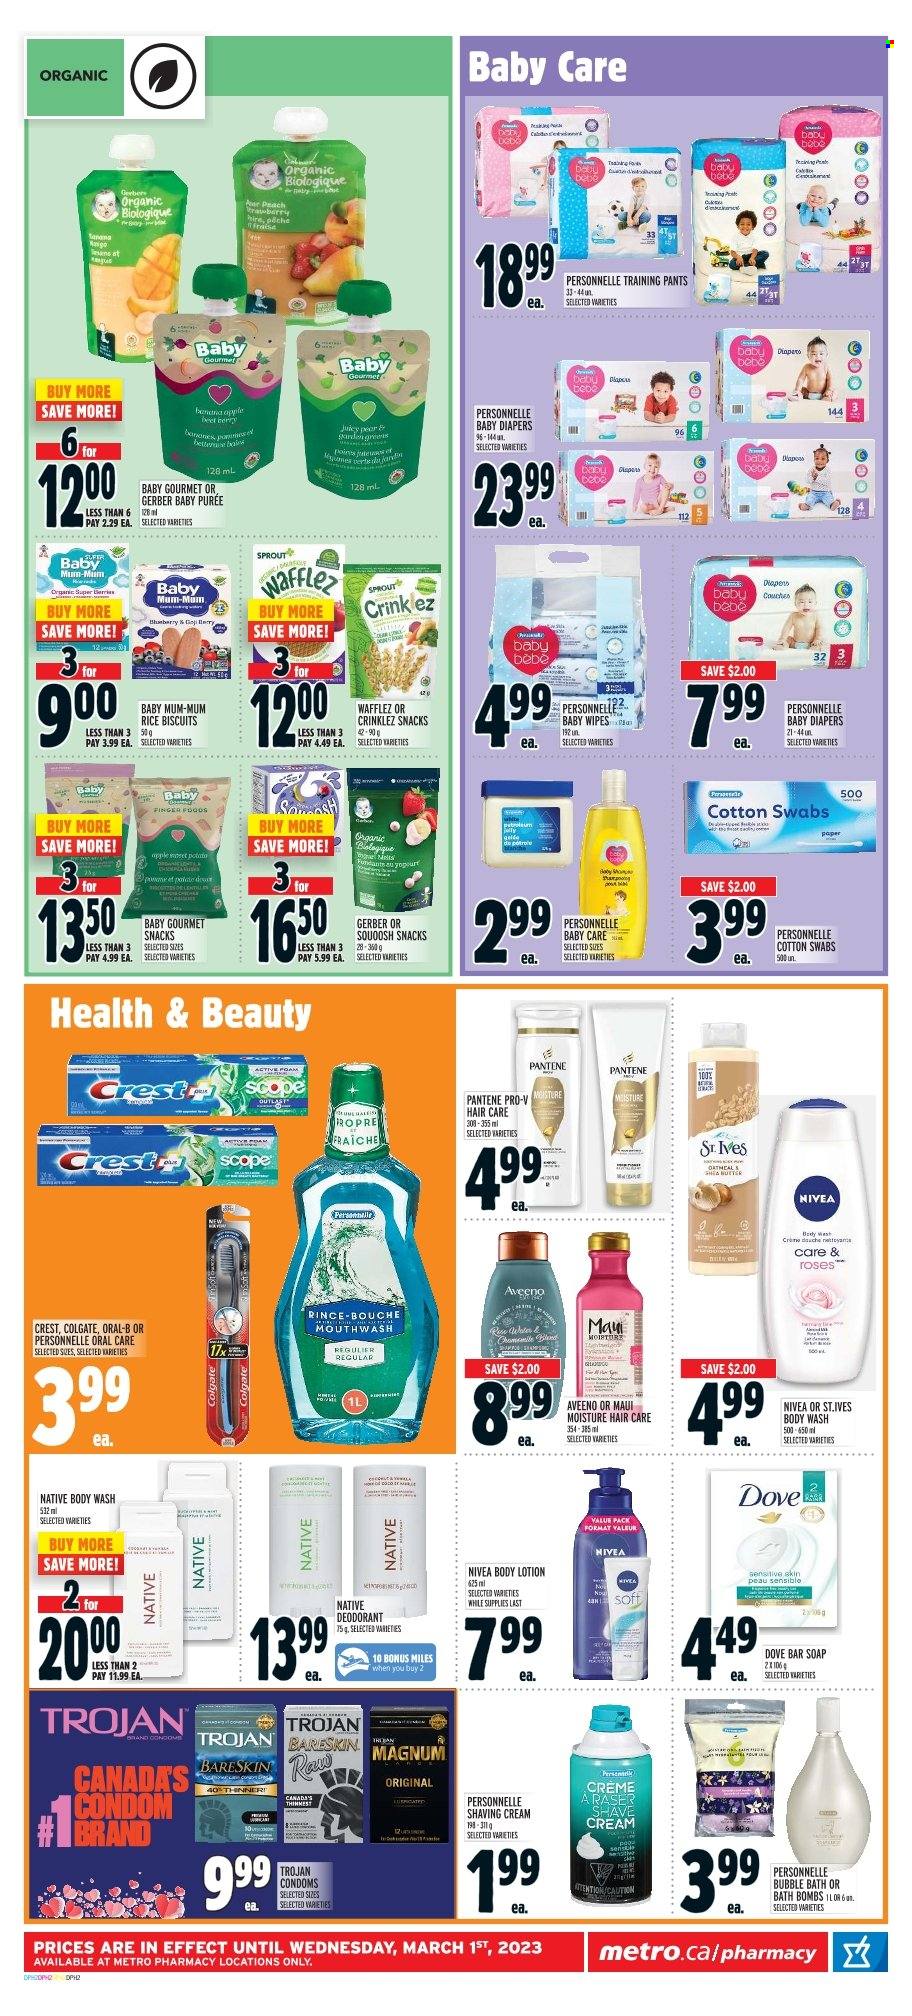 thumbnail - Metro Flyer - February 02, 2023 - February 08, 2023 - Sales products - Magnum, Dove, snack, biscuit, Gerber, rice, Bai, wipes, pants, baby wipes, nappies, baby pants, Aveeno, Nivea, body wash, bubble bath, bath bomb, soap bar, soap, mouthwash, Crest, Pantene, Maui Moisture, body lotion, anti-perspirant, Mum, shave cream, condom, paper, rose, Colgate, Oral-B, deodorant. Page 15.